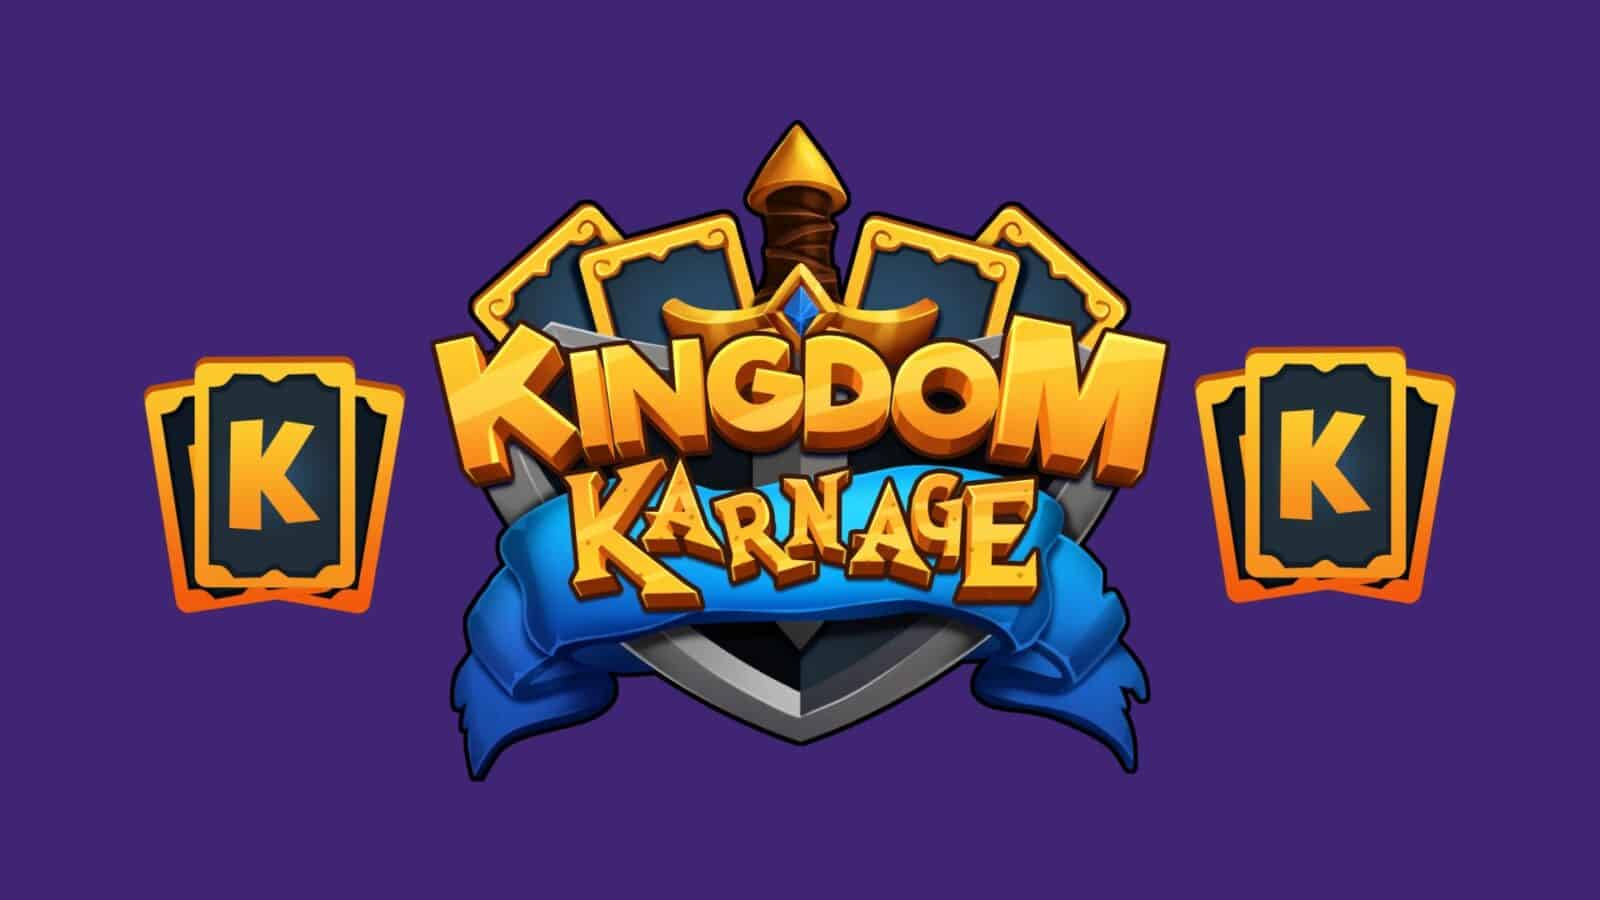 Kingdom Karnage Launches a Referral Contest with M in Rewards